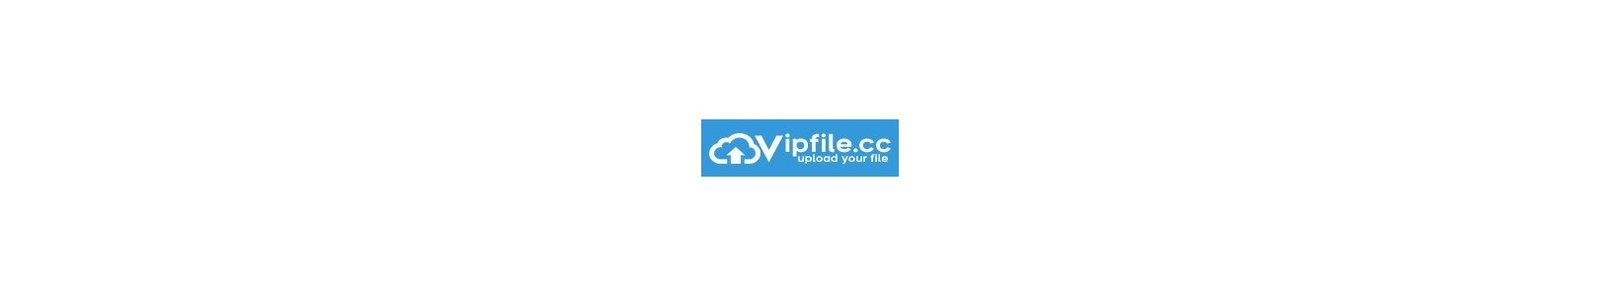 Vipfile.cc-Premium-account-from-official-reseller